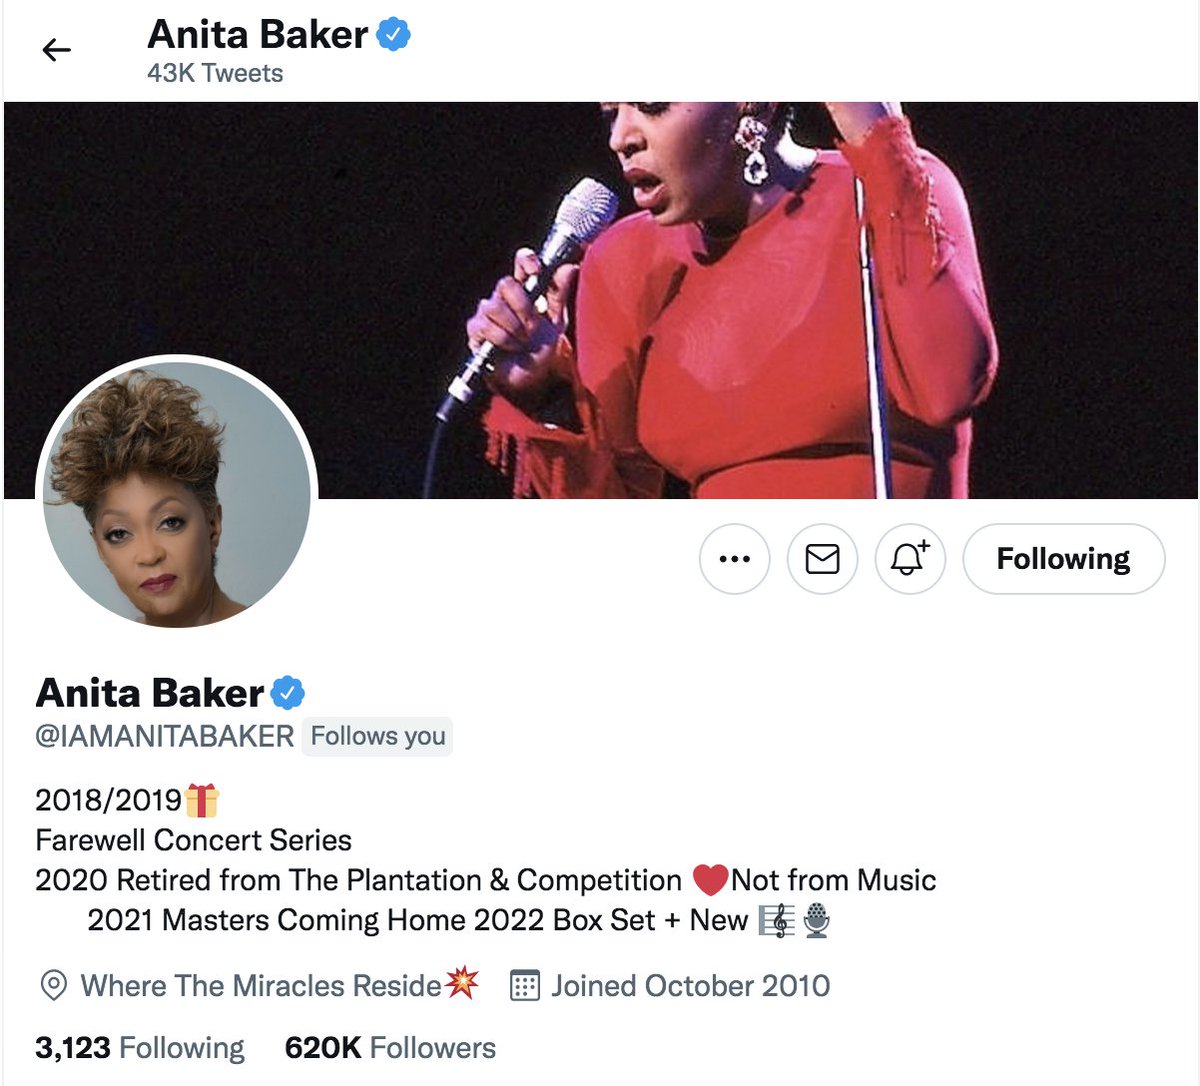 Saw Anita Baker trending and just wanted to share one of the reasons I stay...